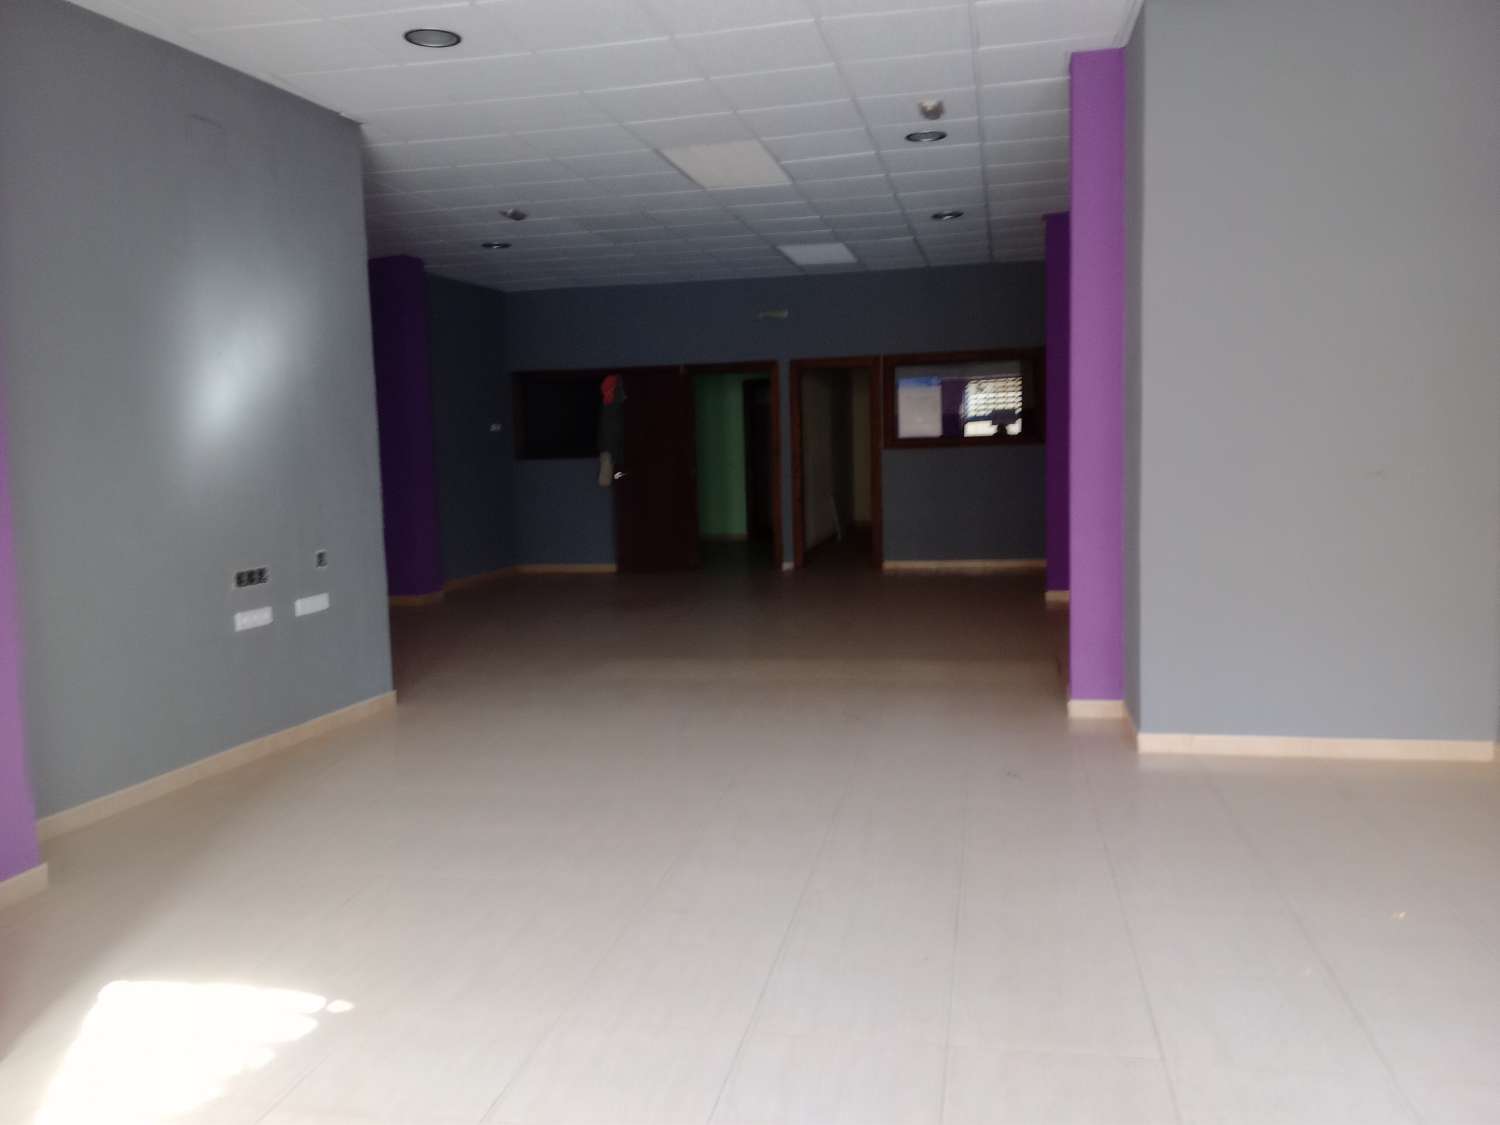 Shop for rent in Pliego